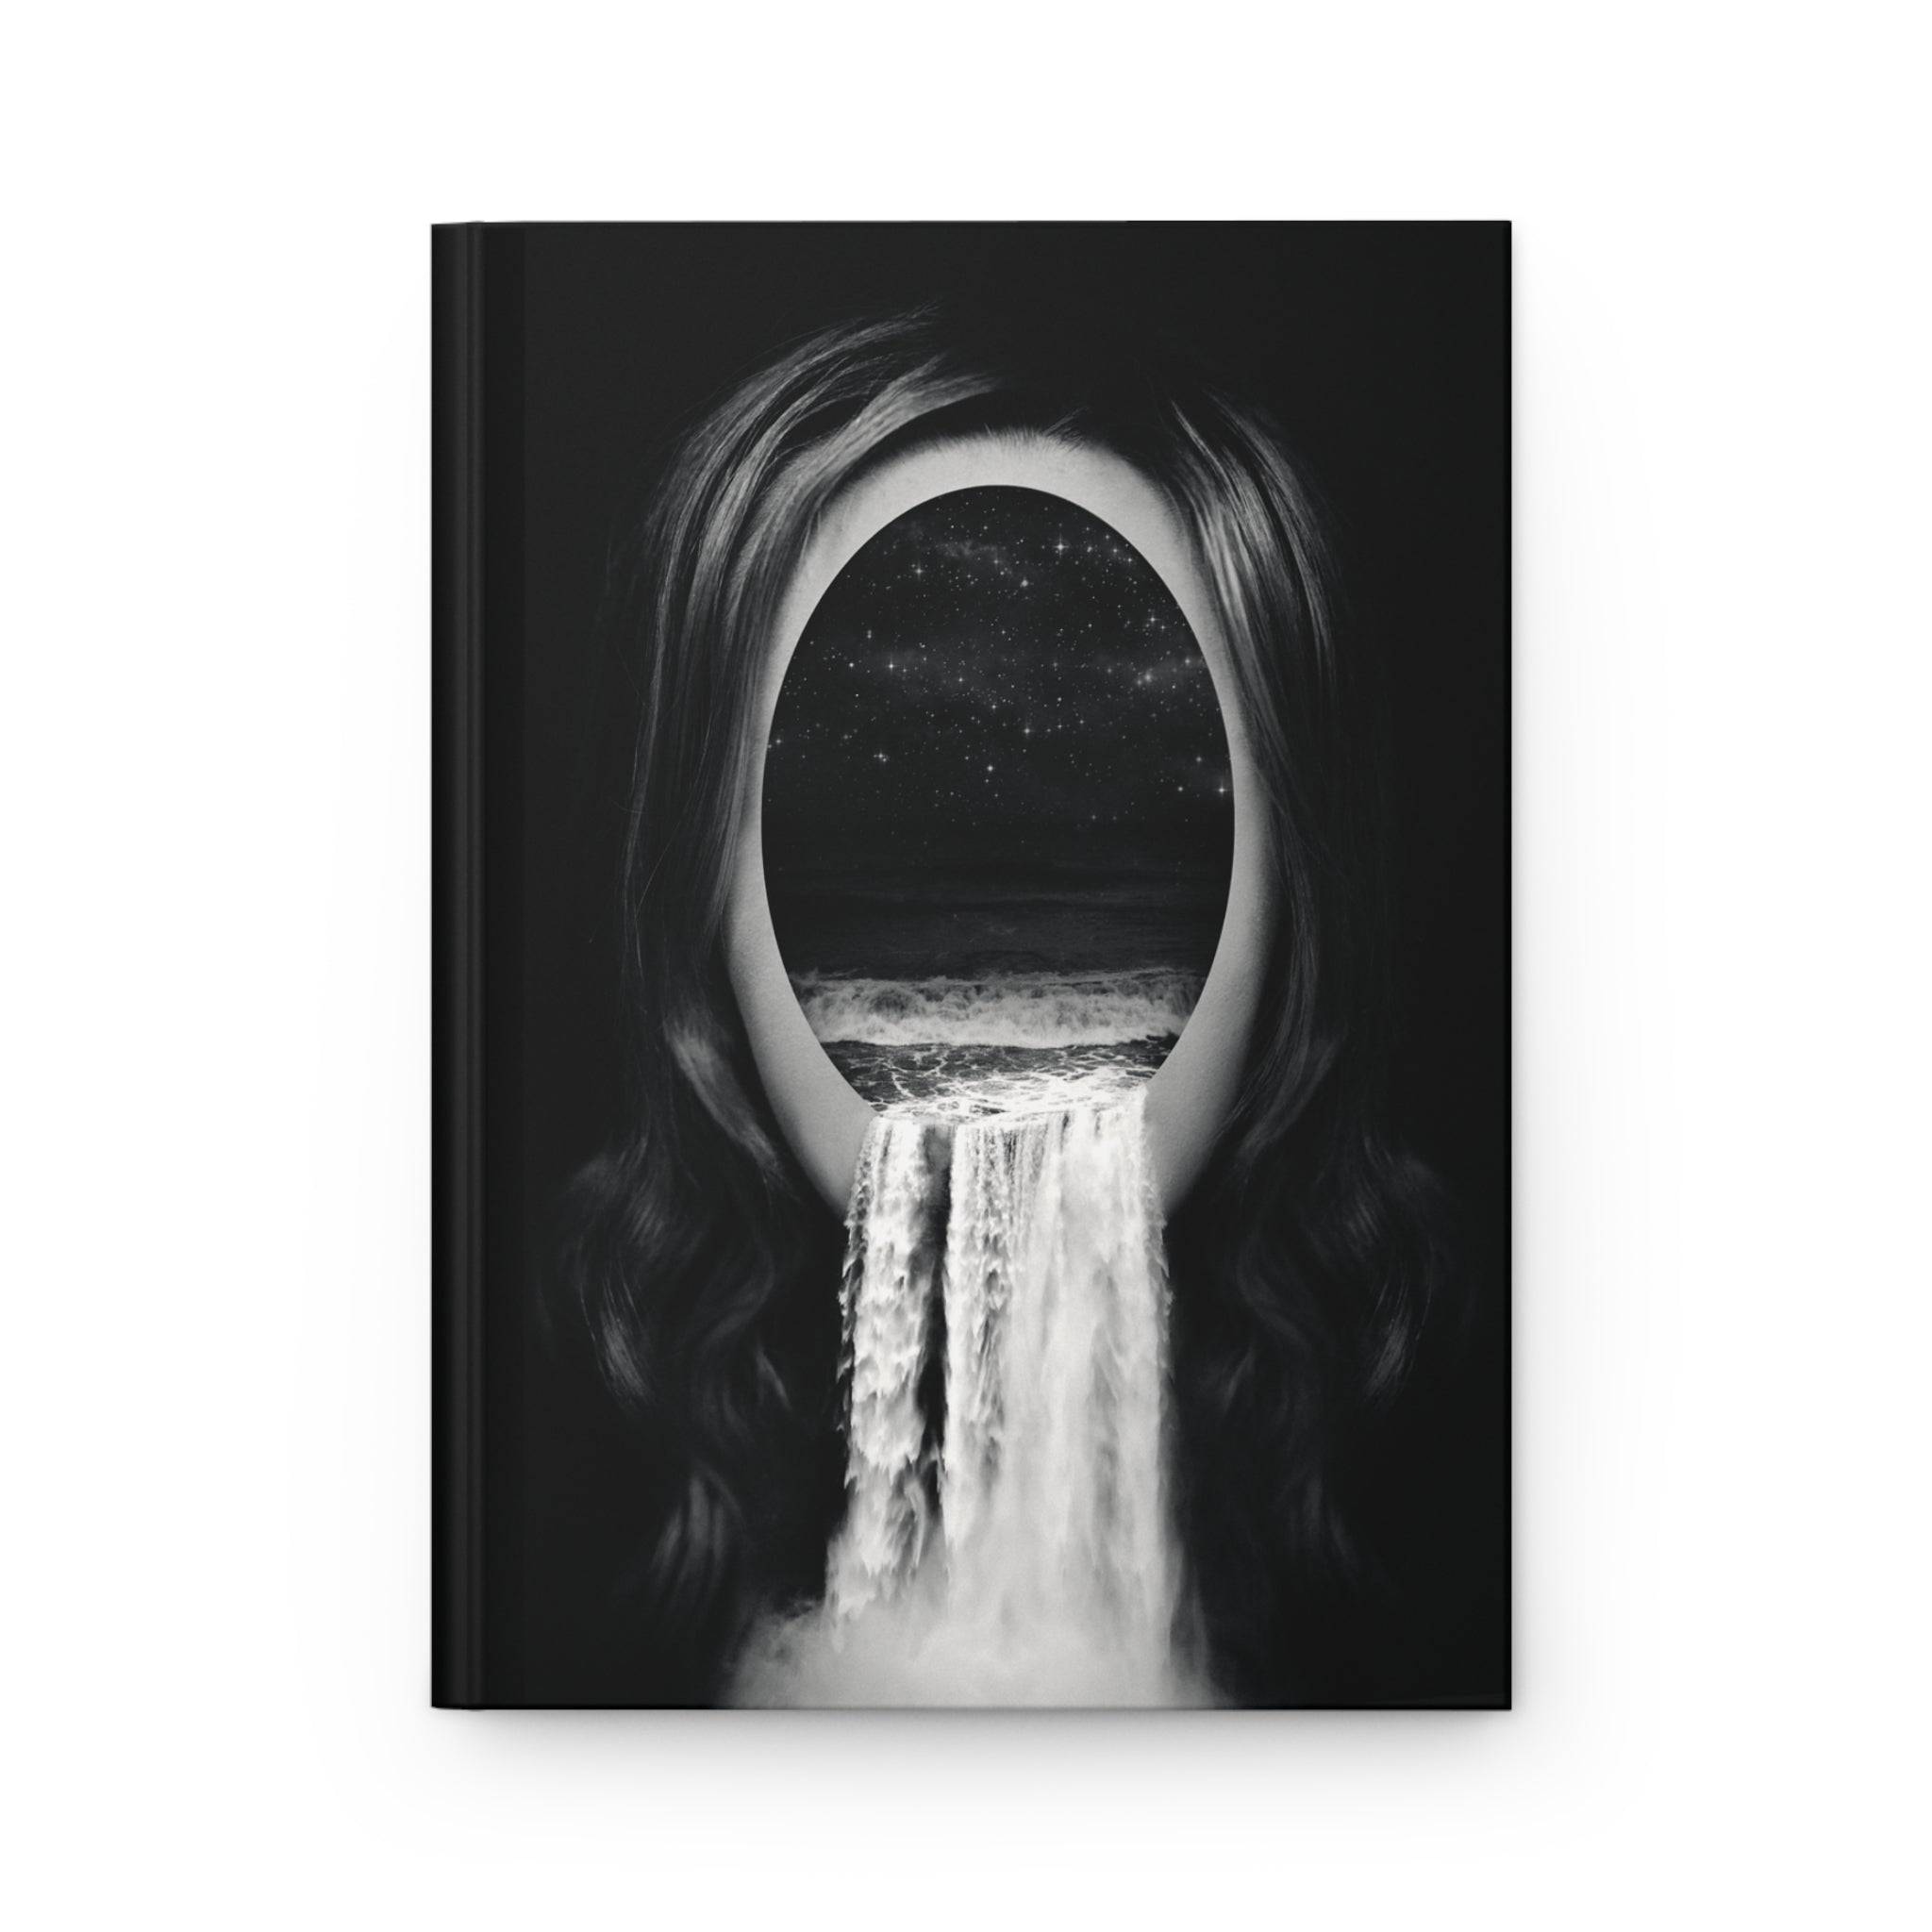 Waterfall on woman face black notebook